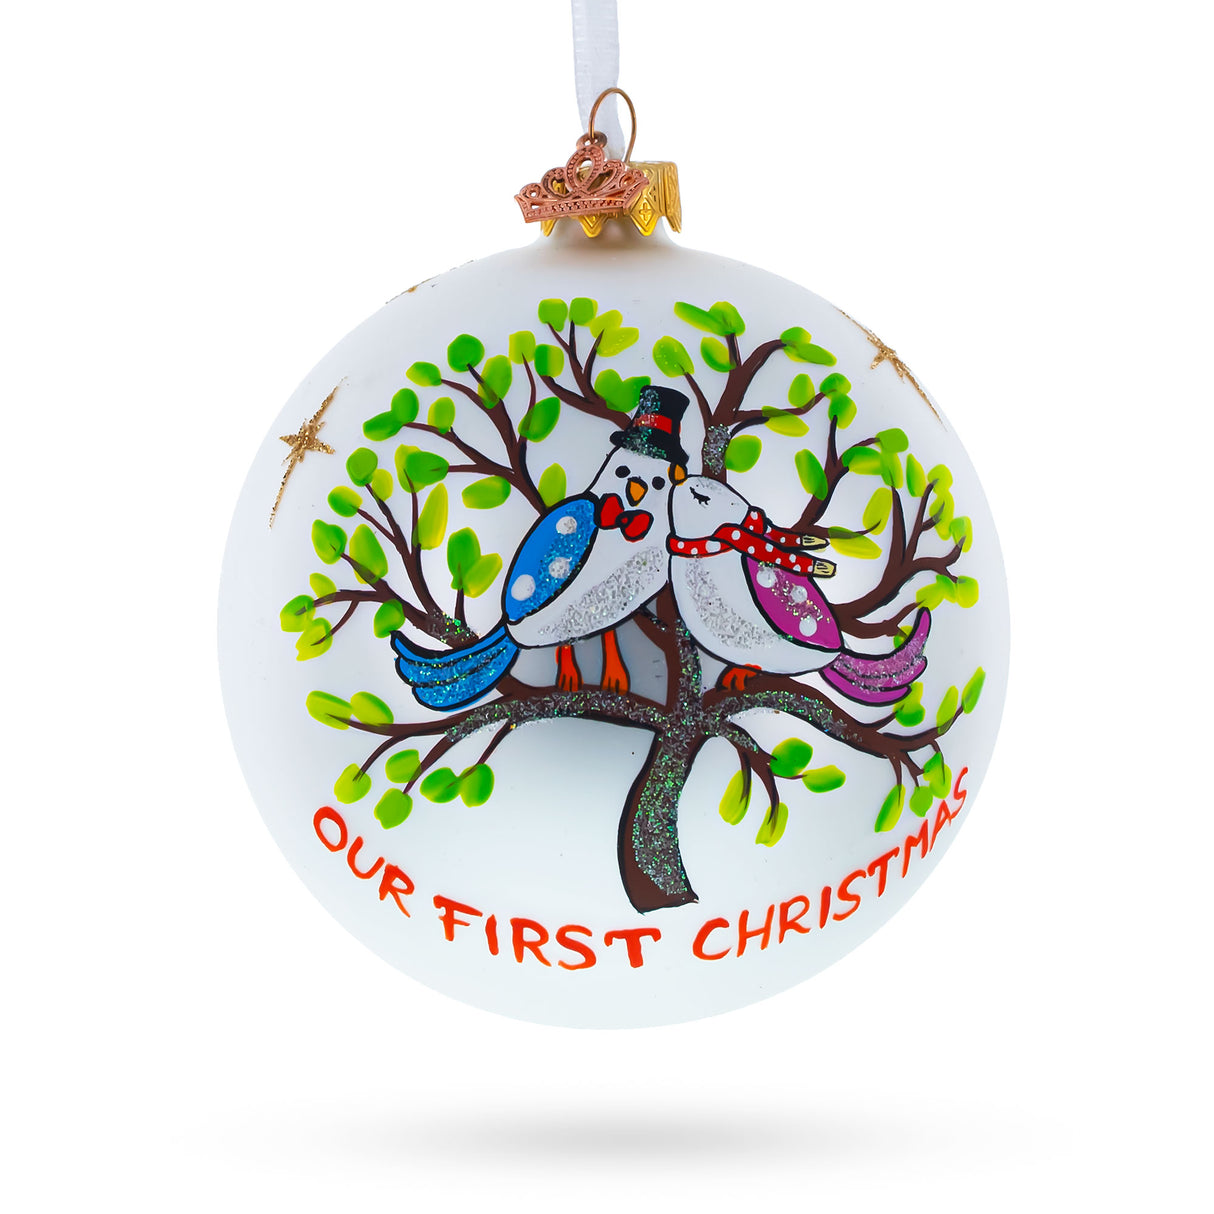 Glass Lovebirds Perched on a Tree Blown Glass Ball 'Our First Christmas' Ornament 4 Inches in White color Round